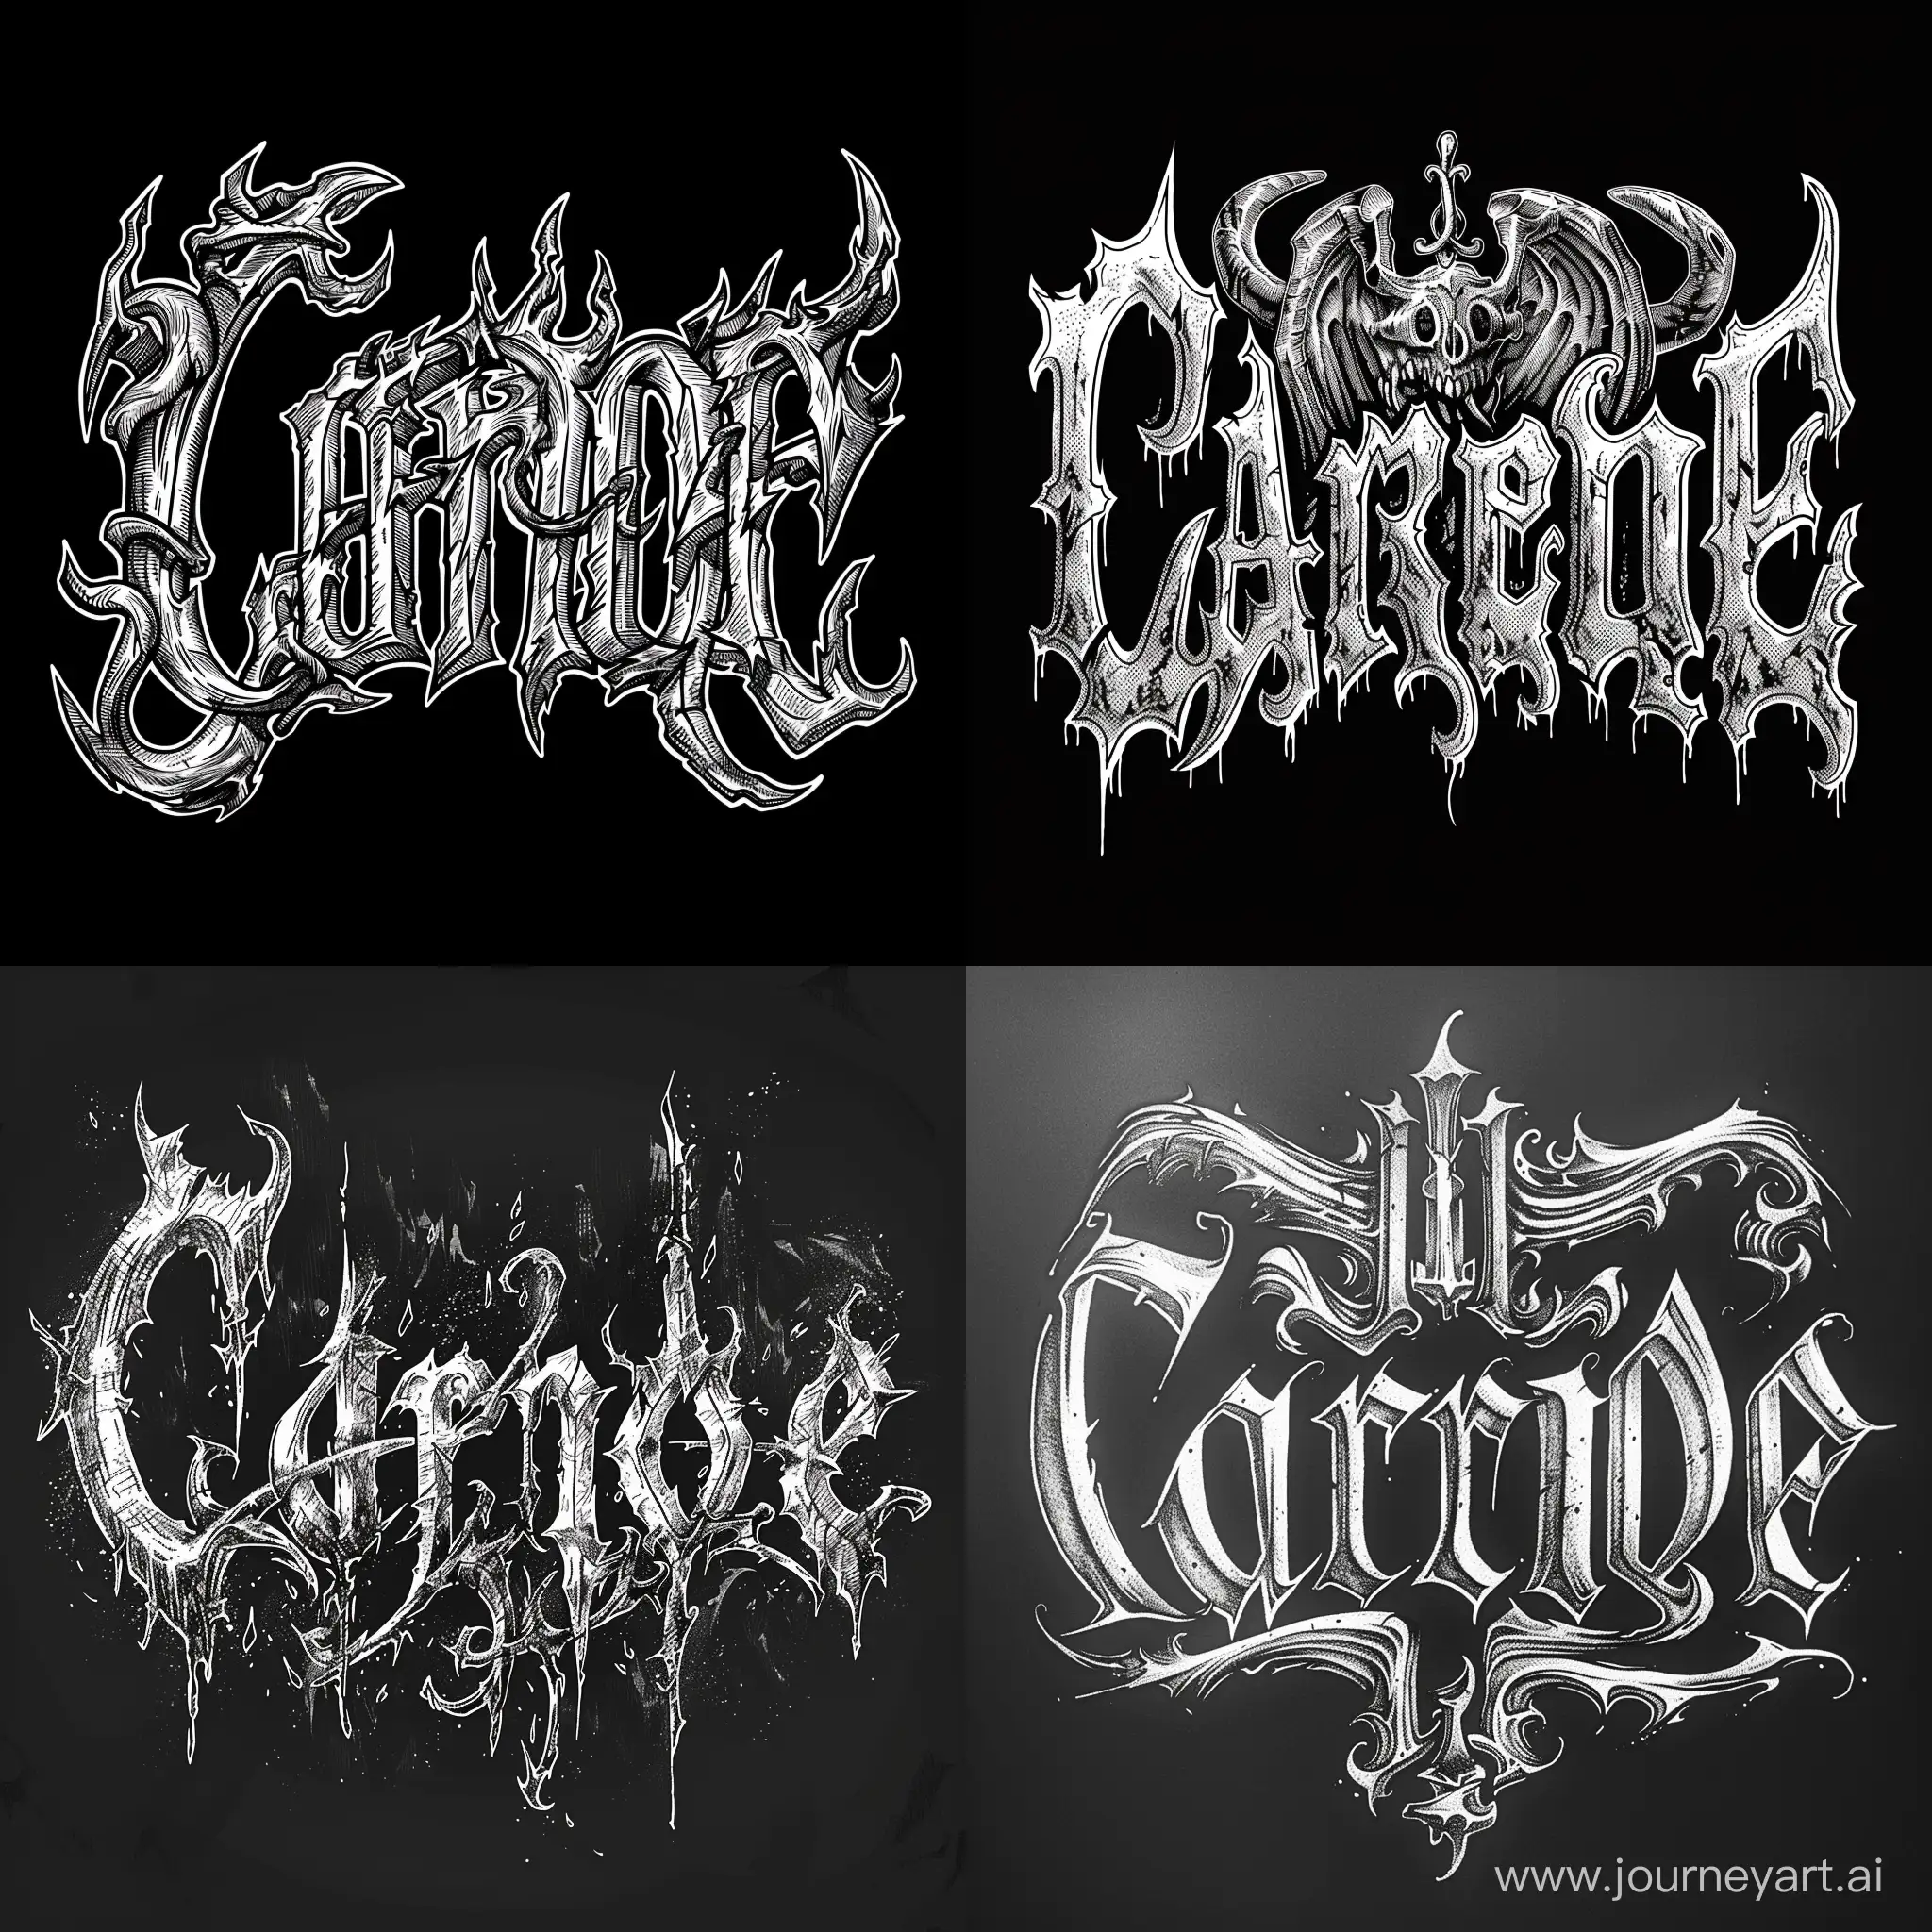 the word Carne is made in the font of black metal groups in black and white style